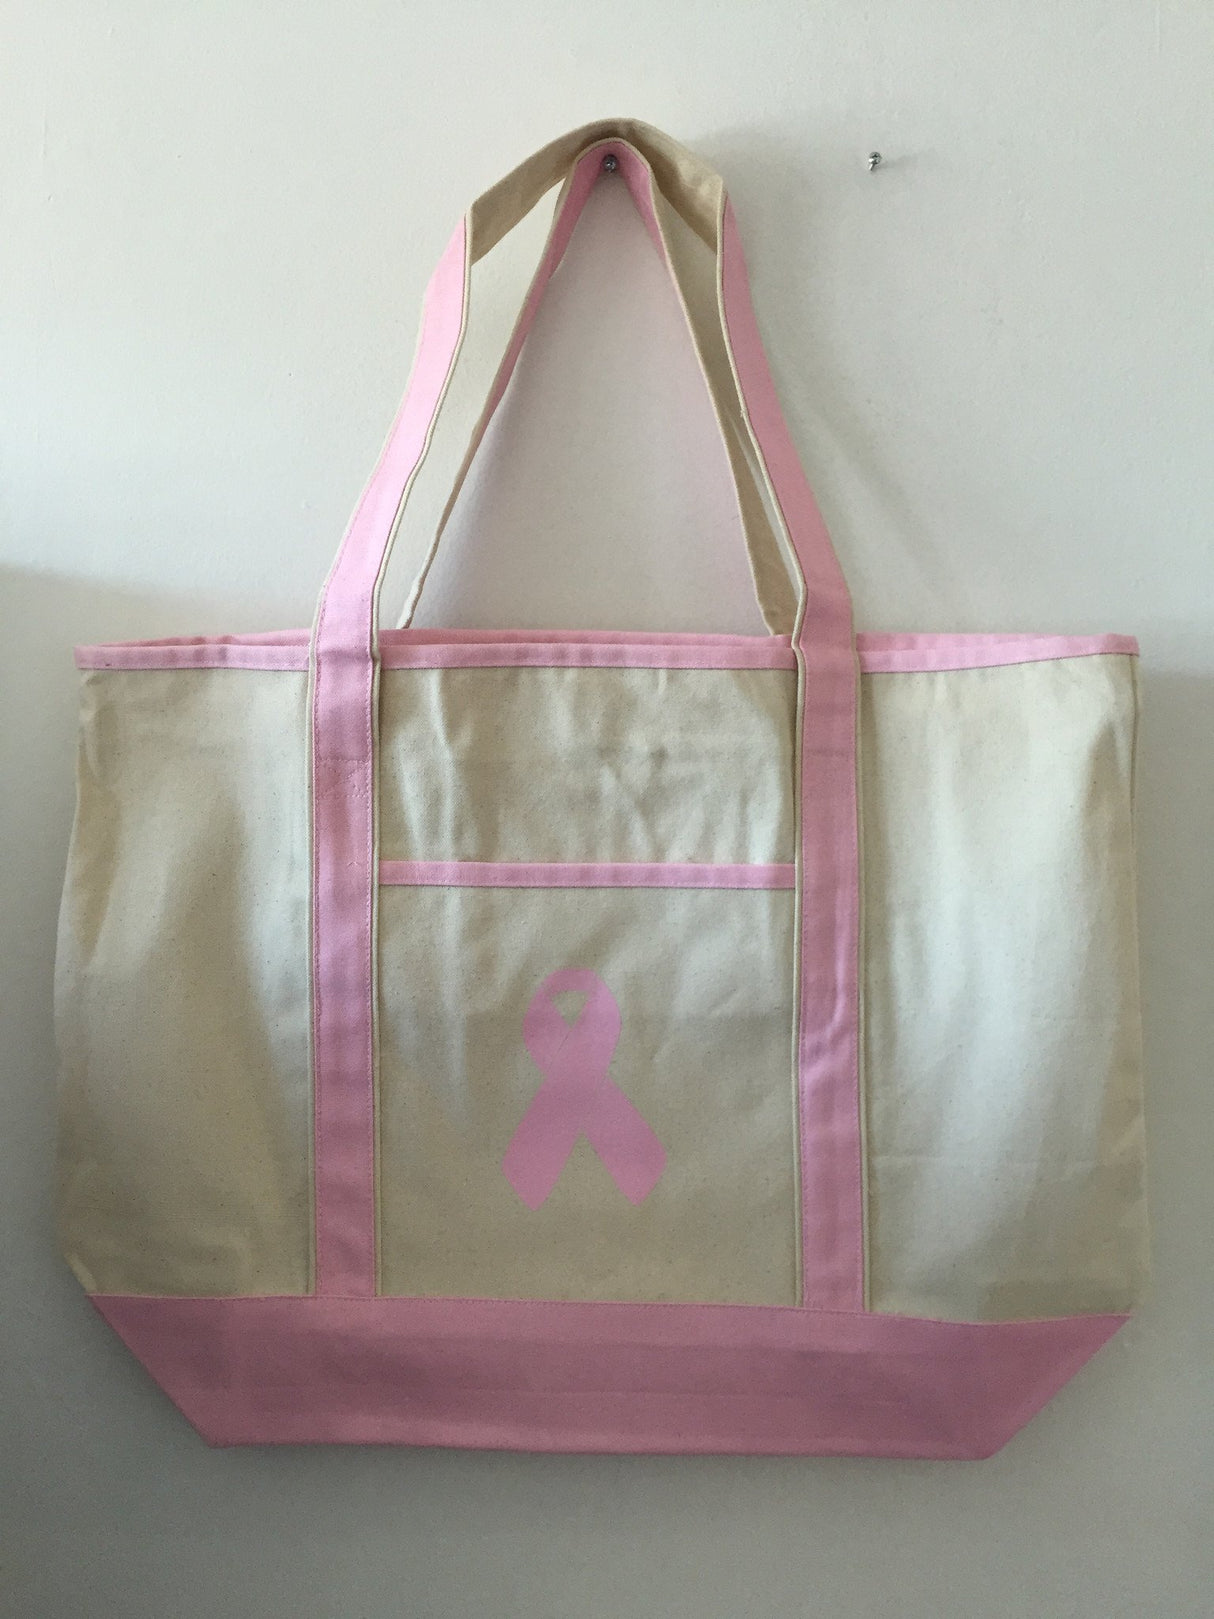 72 ct Medium Size Heavy Canvas Deluxe Tote Bag - By Case